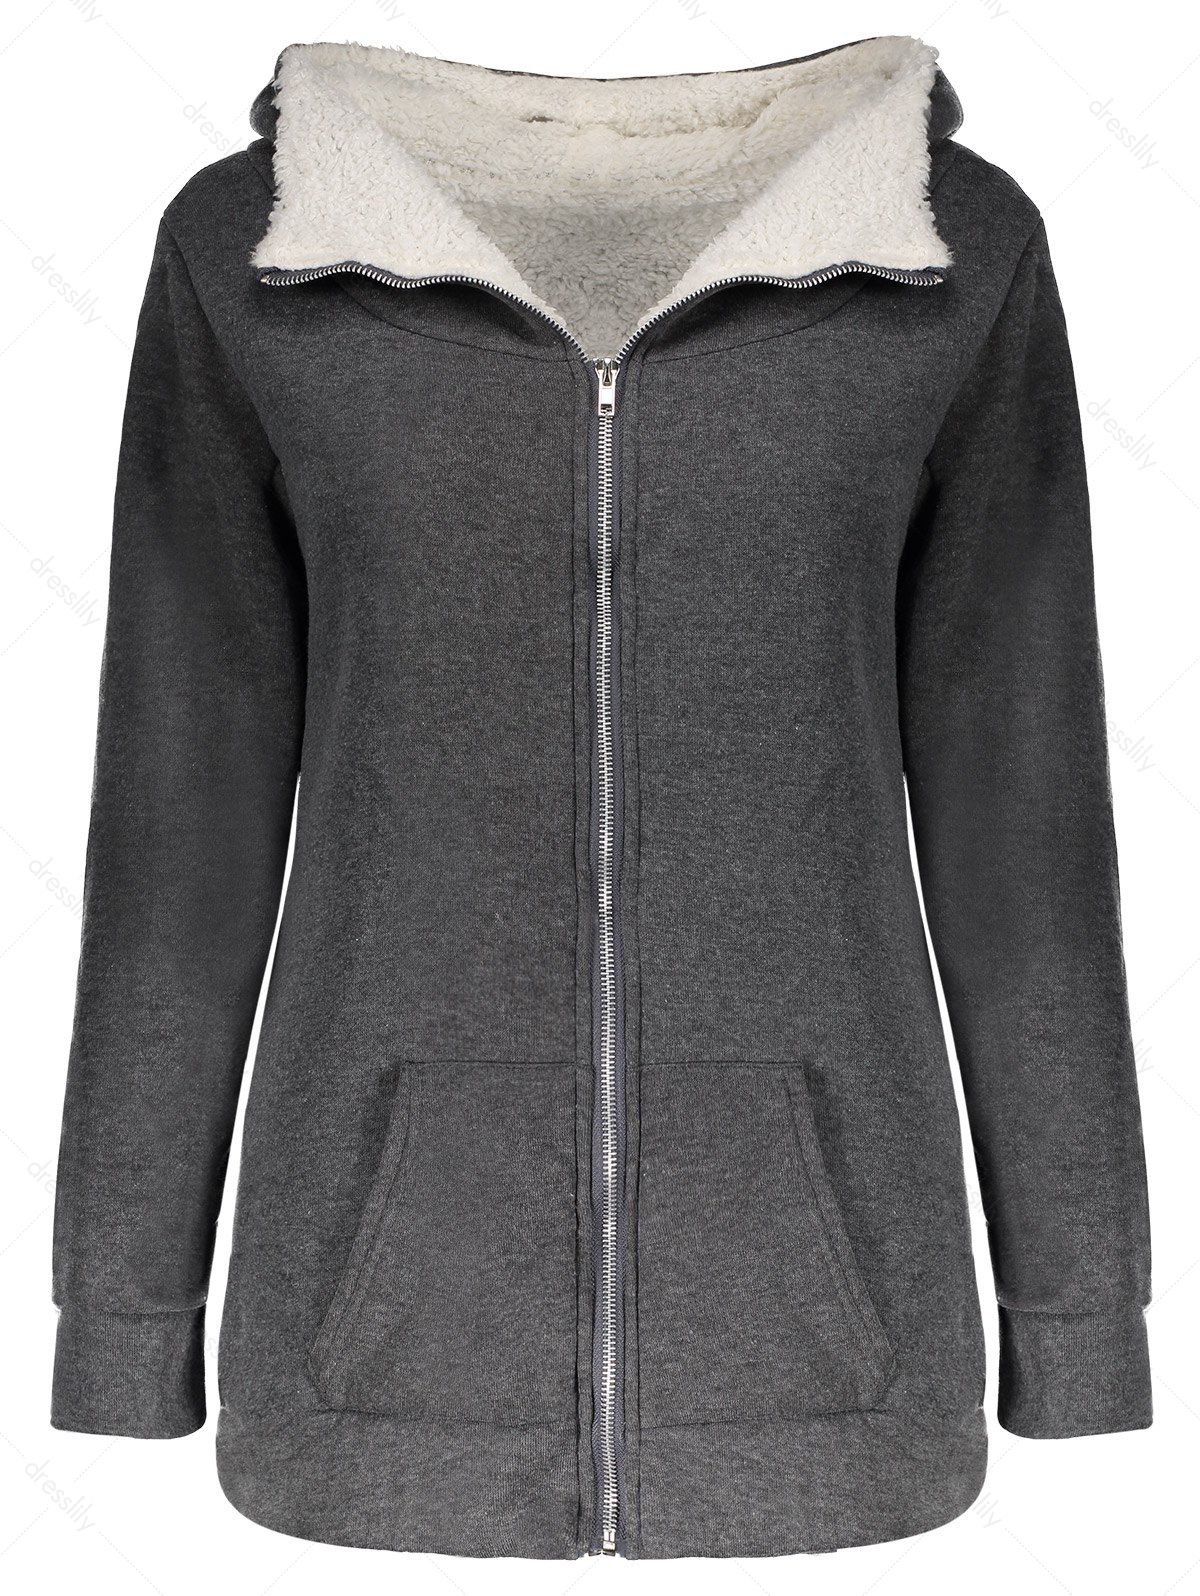 Casual Hooded Long Sleeve Fleece Pocket Design Zippered Women's Coat - GRAY ONE SIZE(FIT SIZE XS TO M)